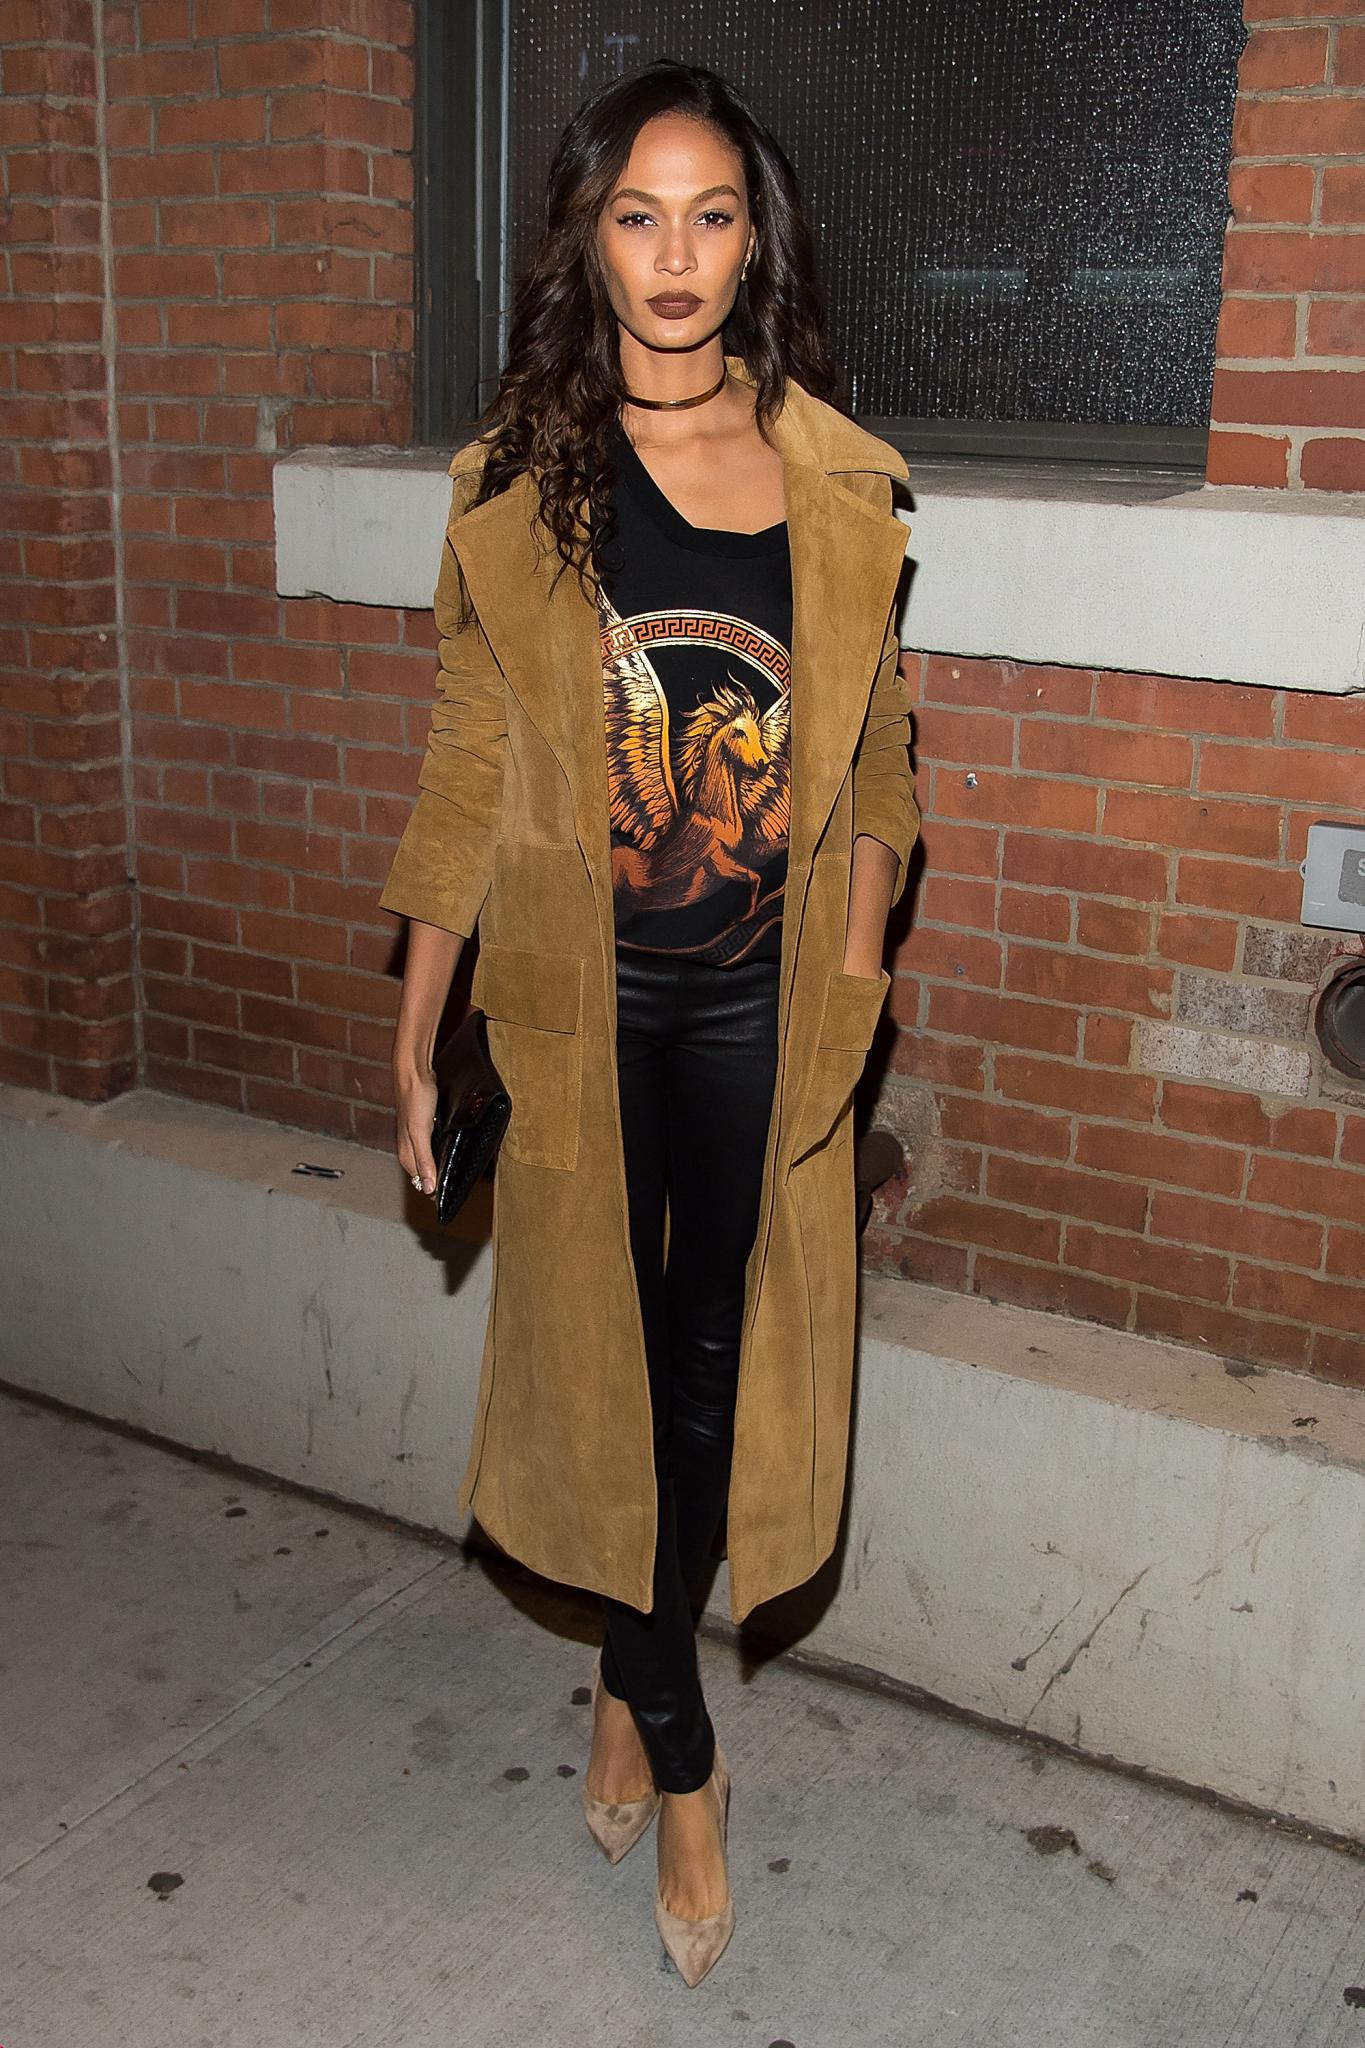 J-Hud, Lupita, Misty and Uzo Top the Best Dressed List This Week
